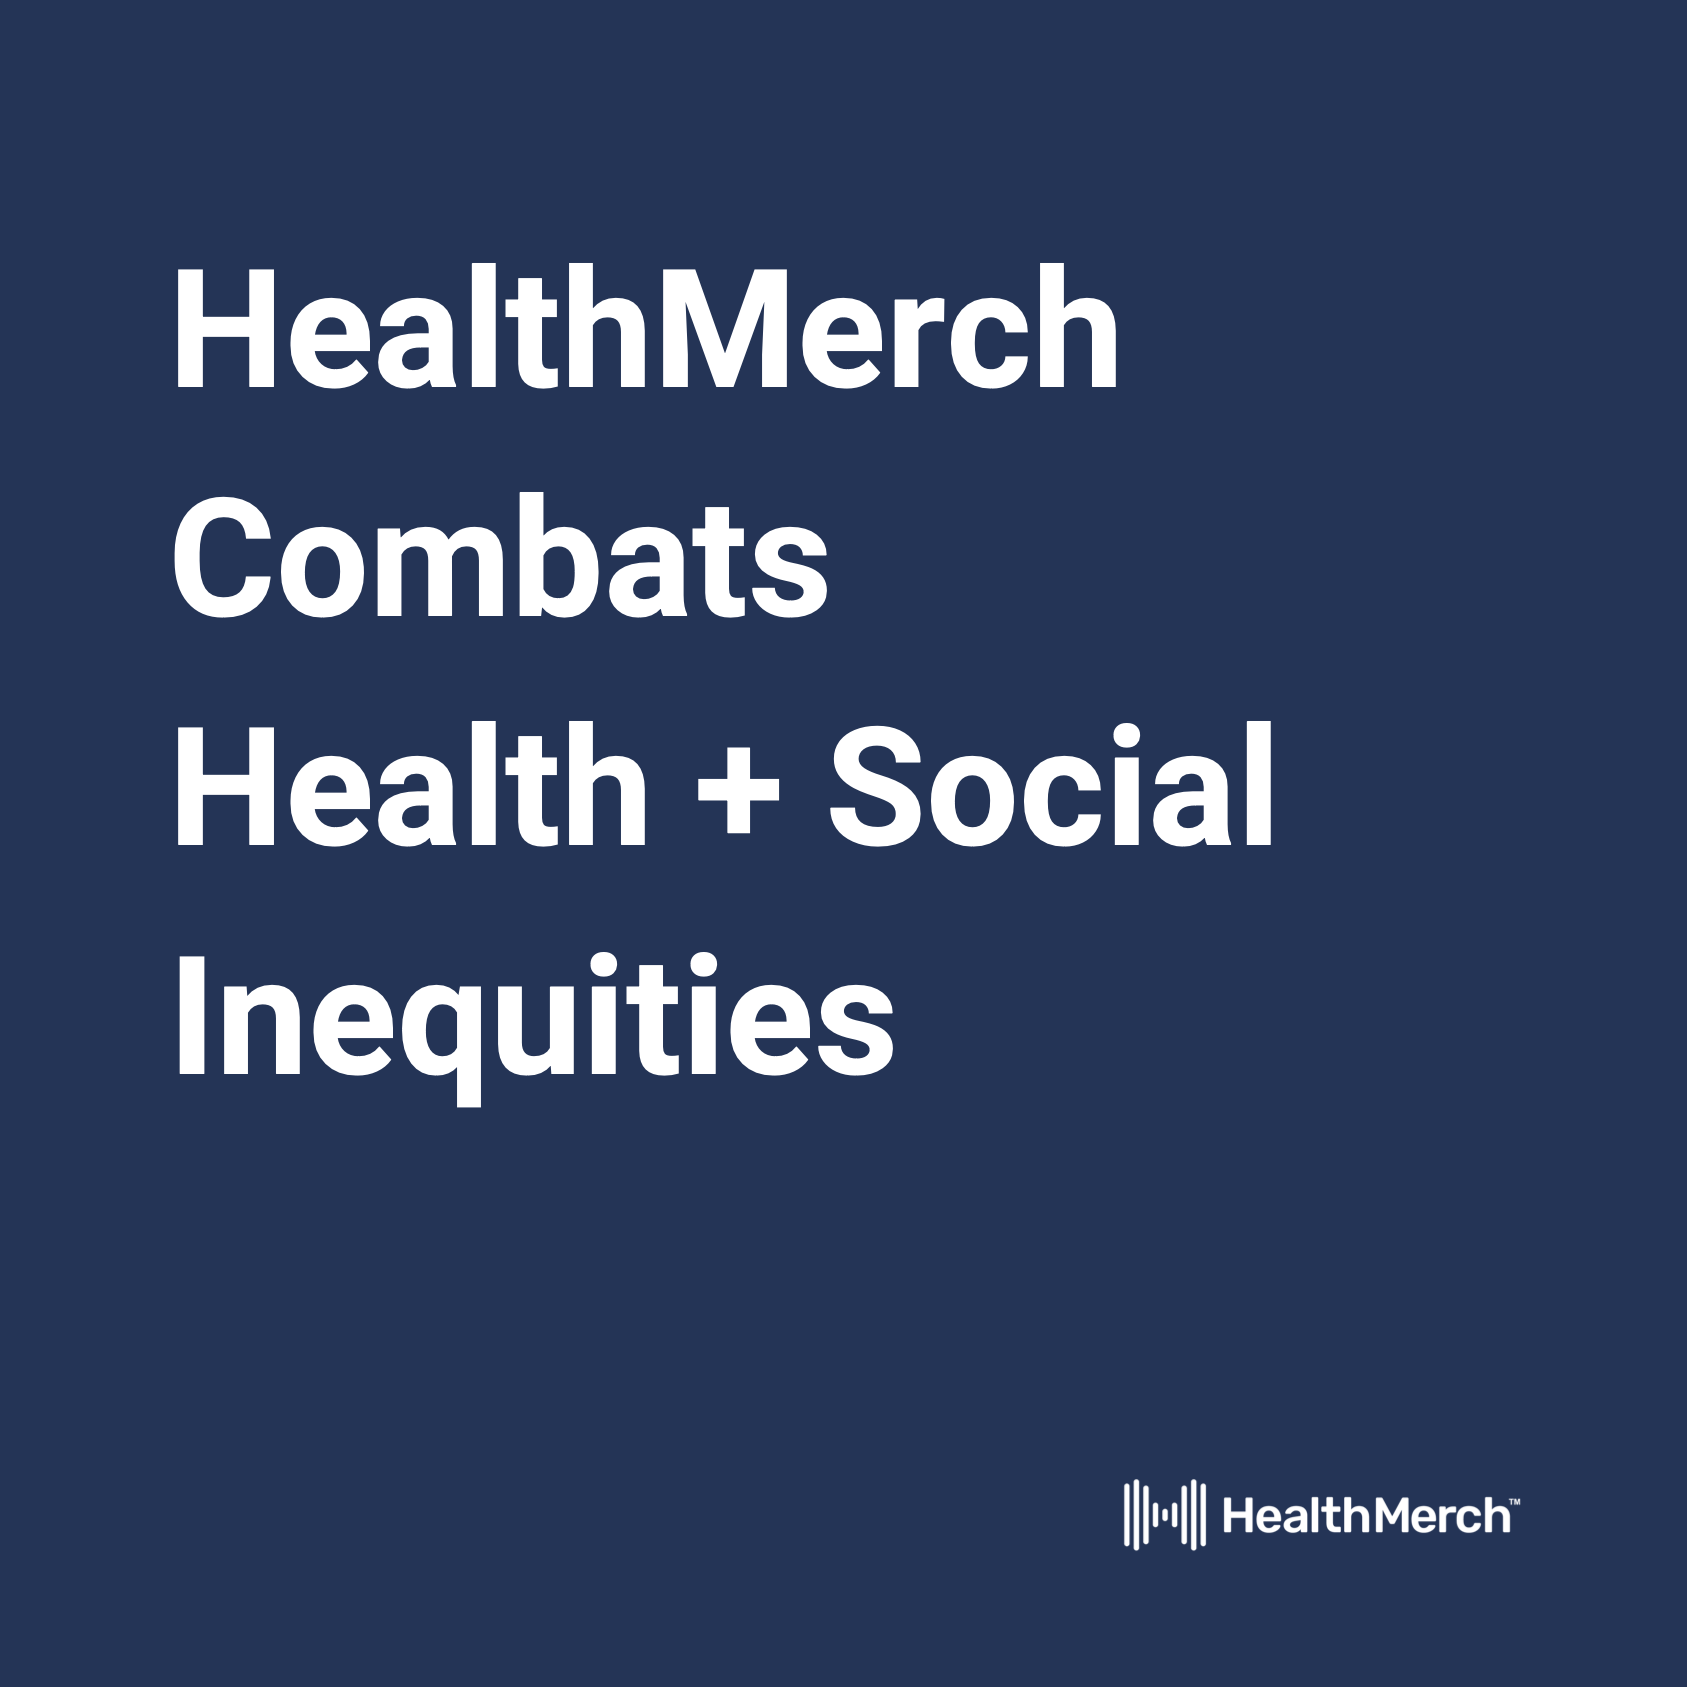 HealthMerch Response to Executive Order on Ensuring an Equitable Pandemic Response and Recovery